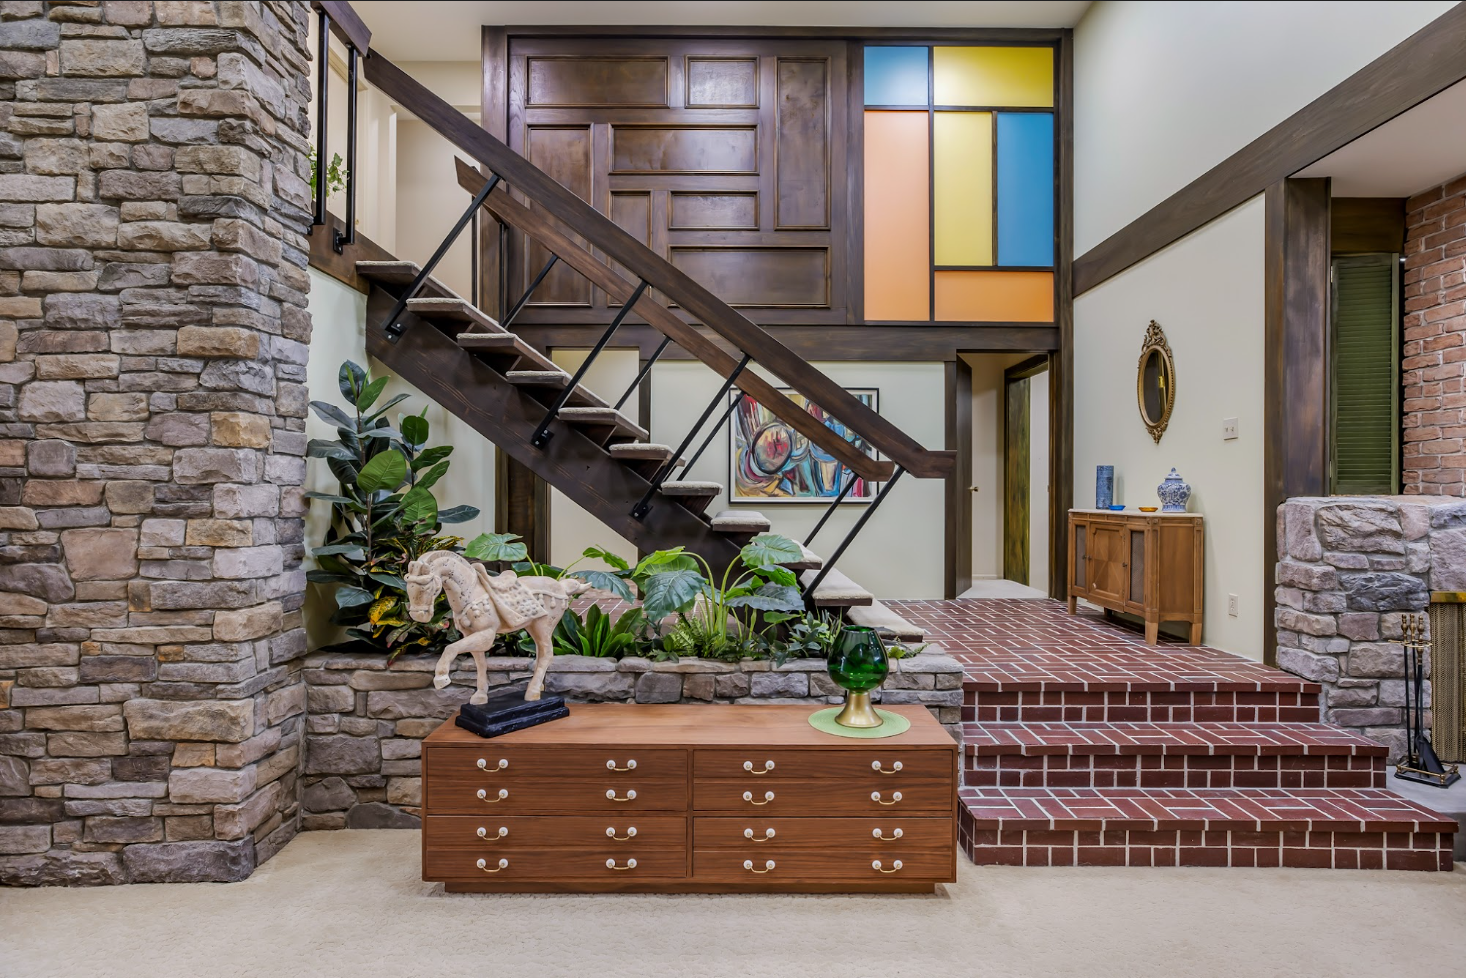 "The Brady Bunch" iconic floating staircase was meticulously replicated in this North Hollywood home.